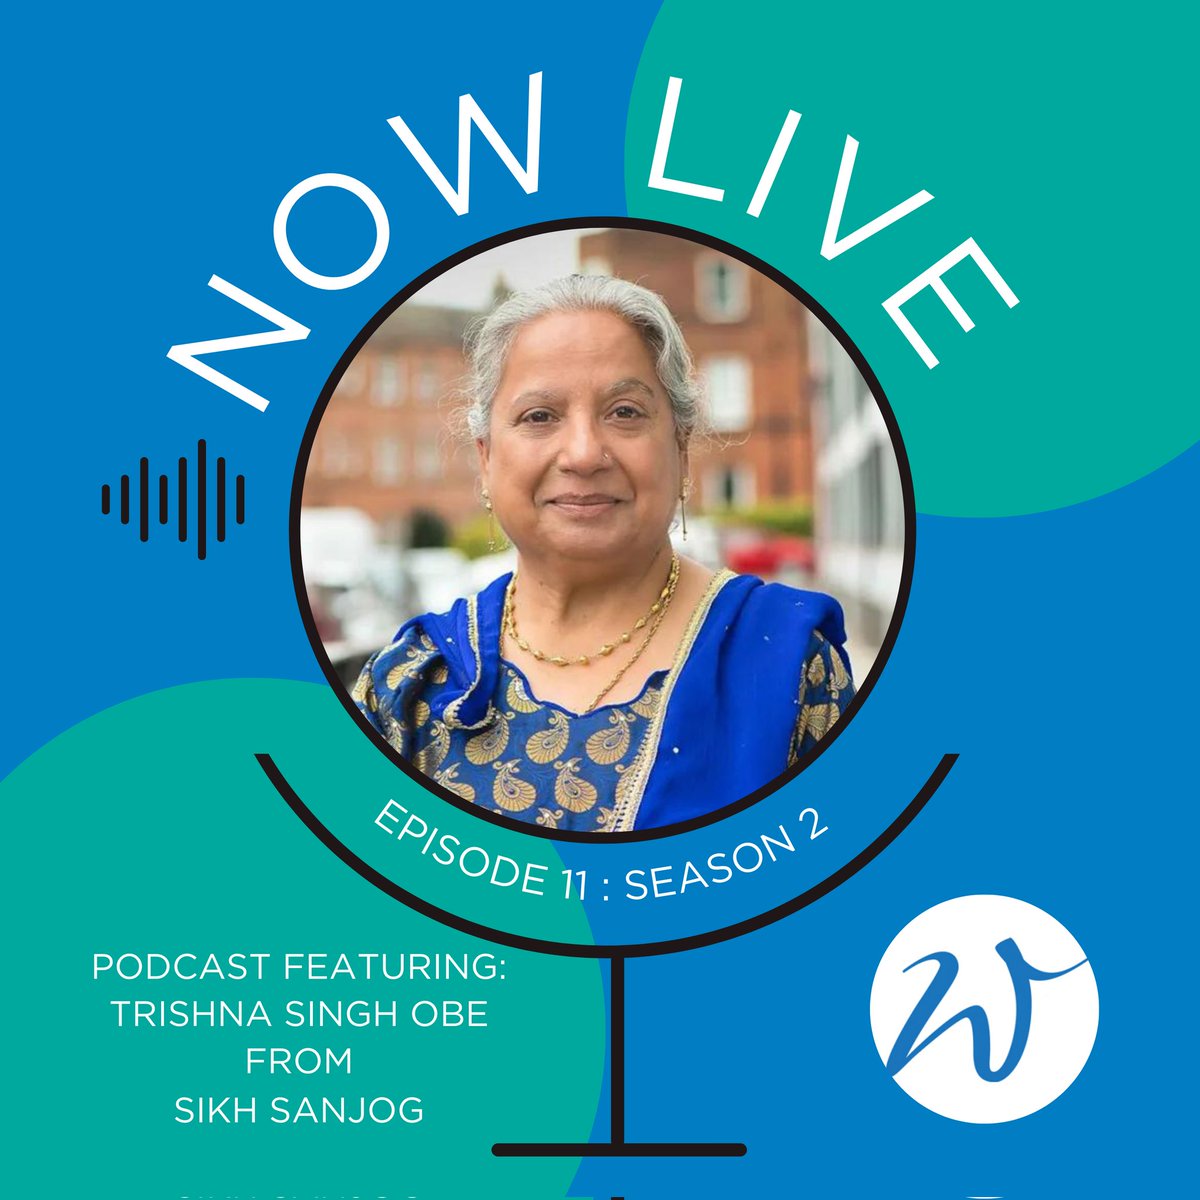 We are delighted to announce that season 2 of our podcast is LIVE! @Sikh_Sanjog Have a listen to find out a little more and please do give us your thoughts: womensfundscotland.org/project-storie… #InvestInHer